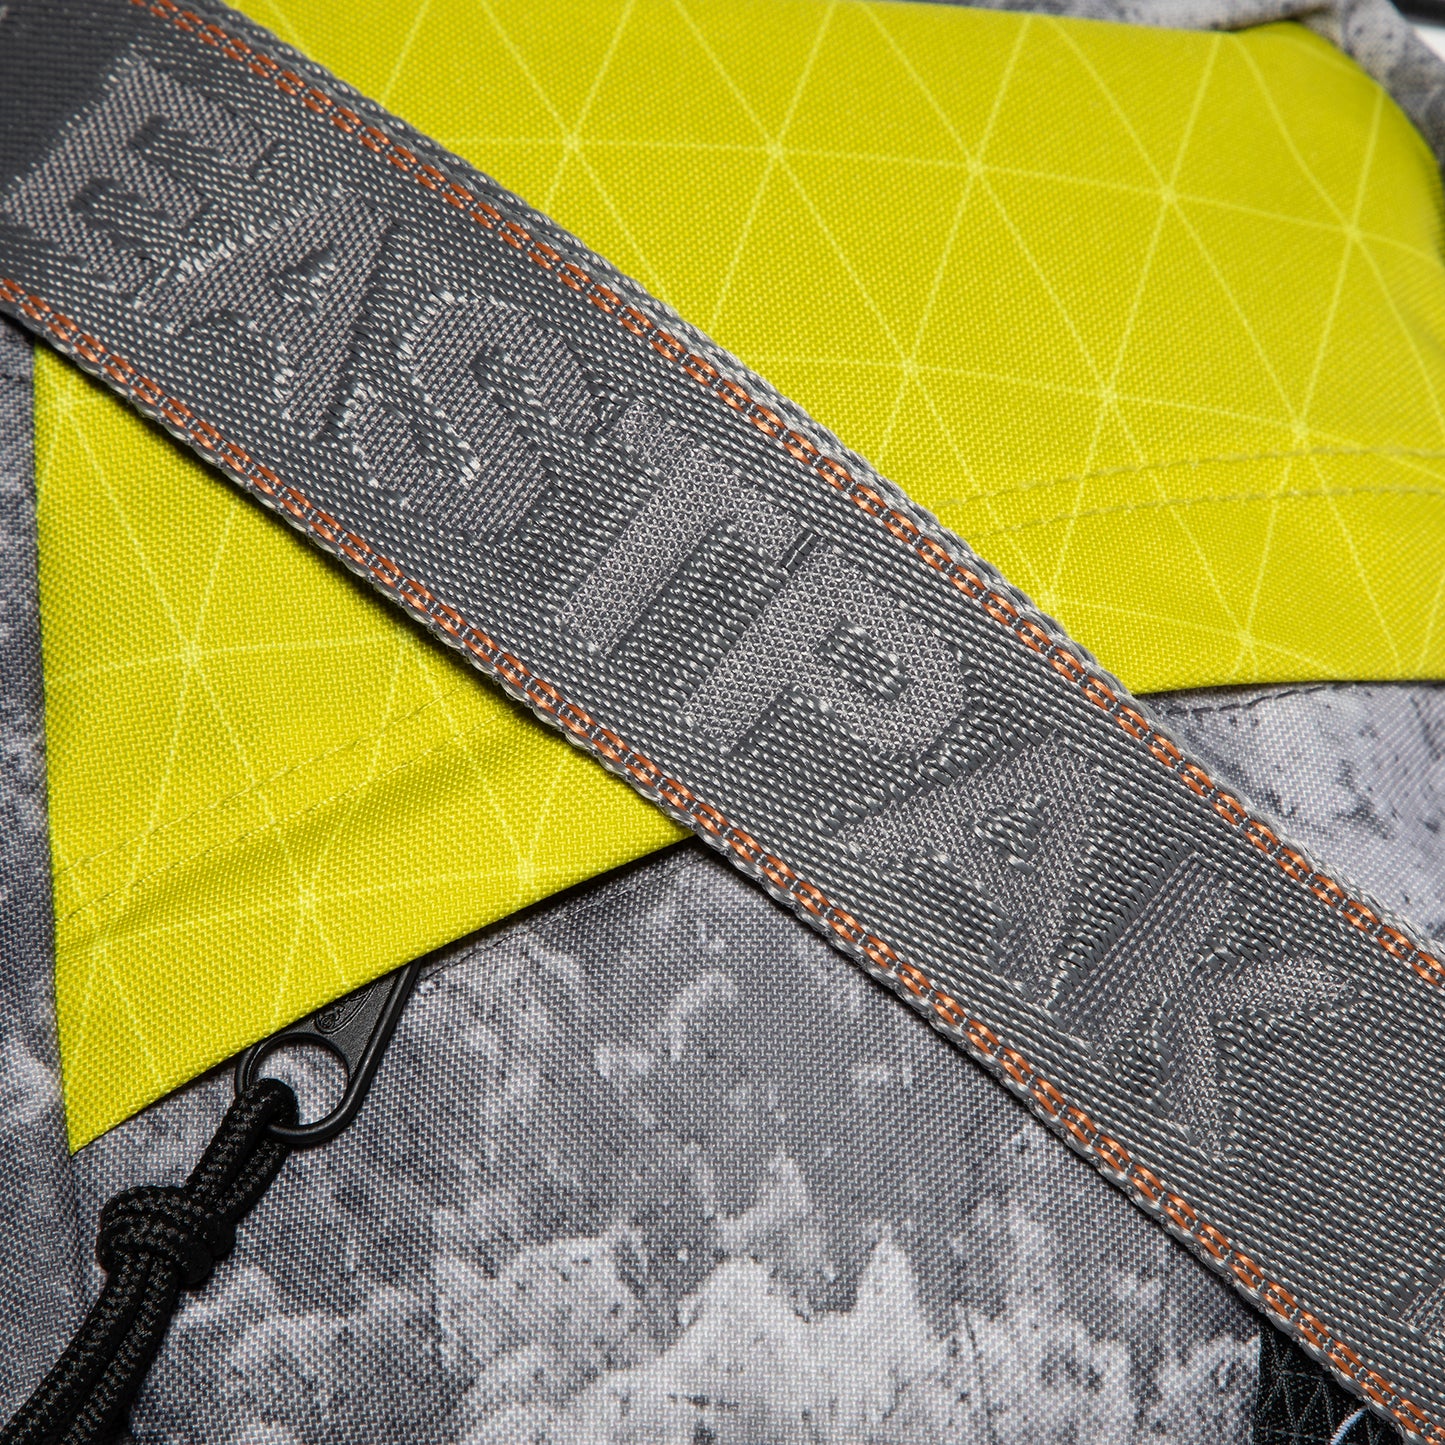 A-COLD-WALL x East Pak Crossbody Pouch (Light Grey/Lime)